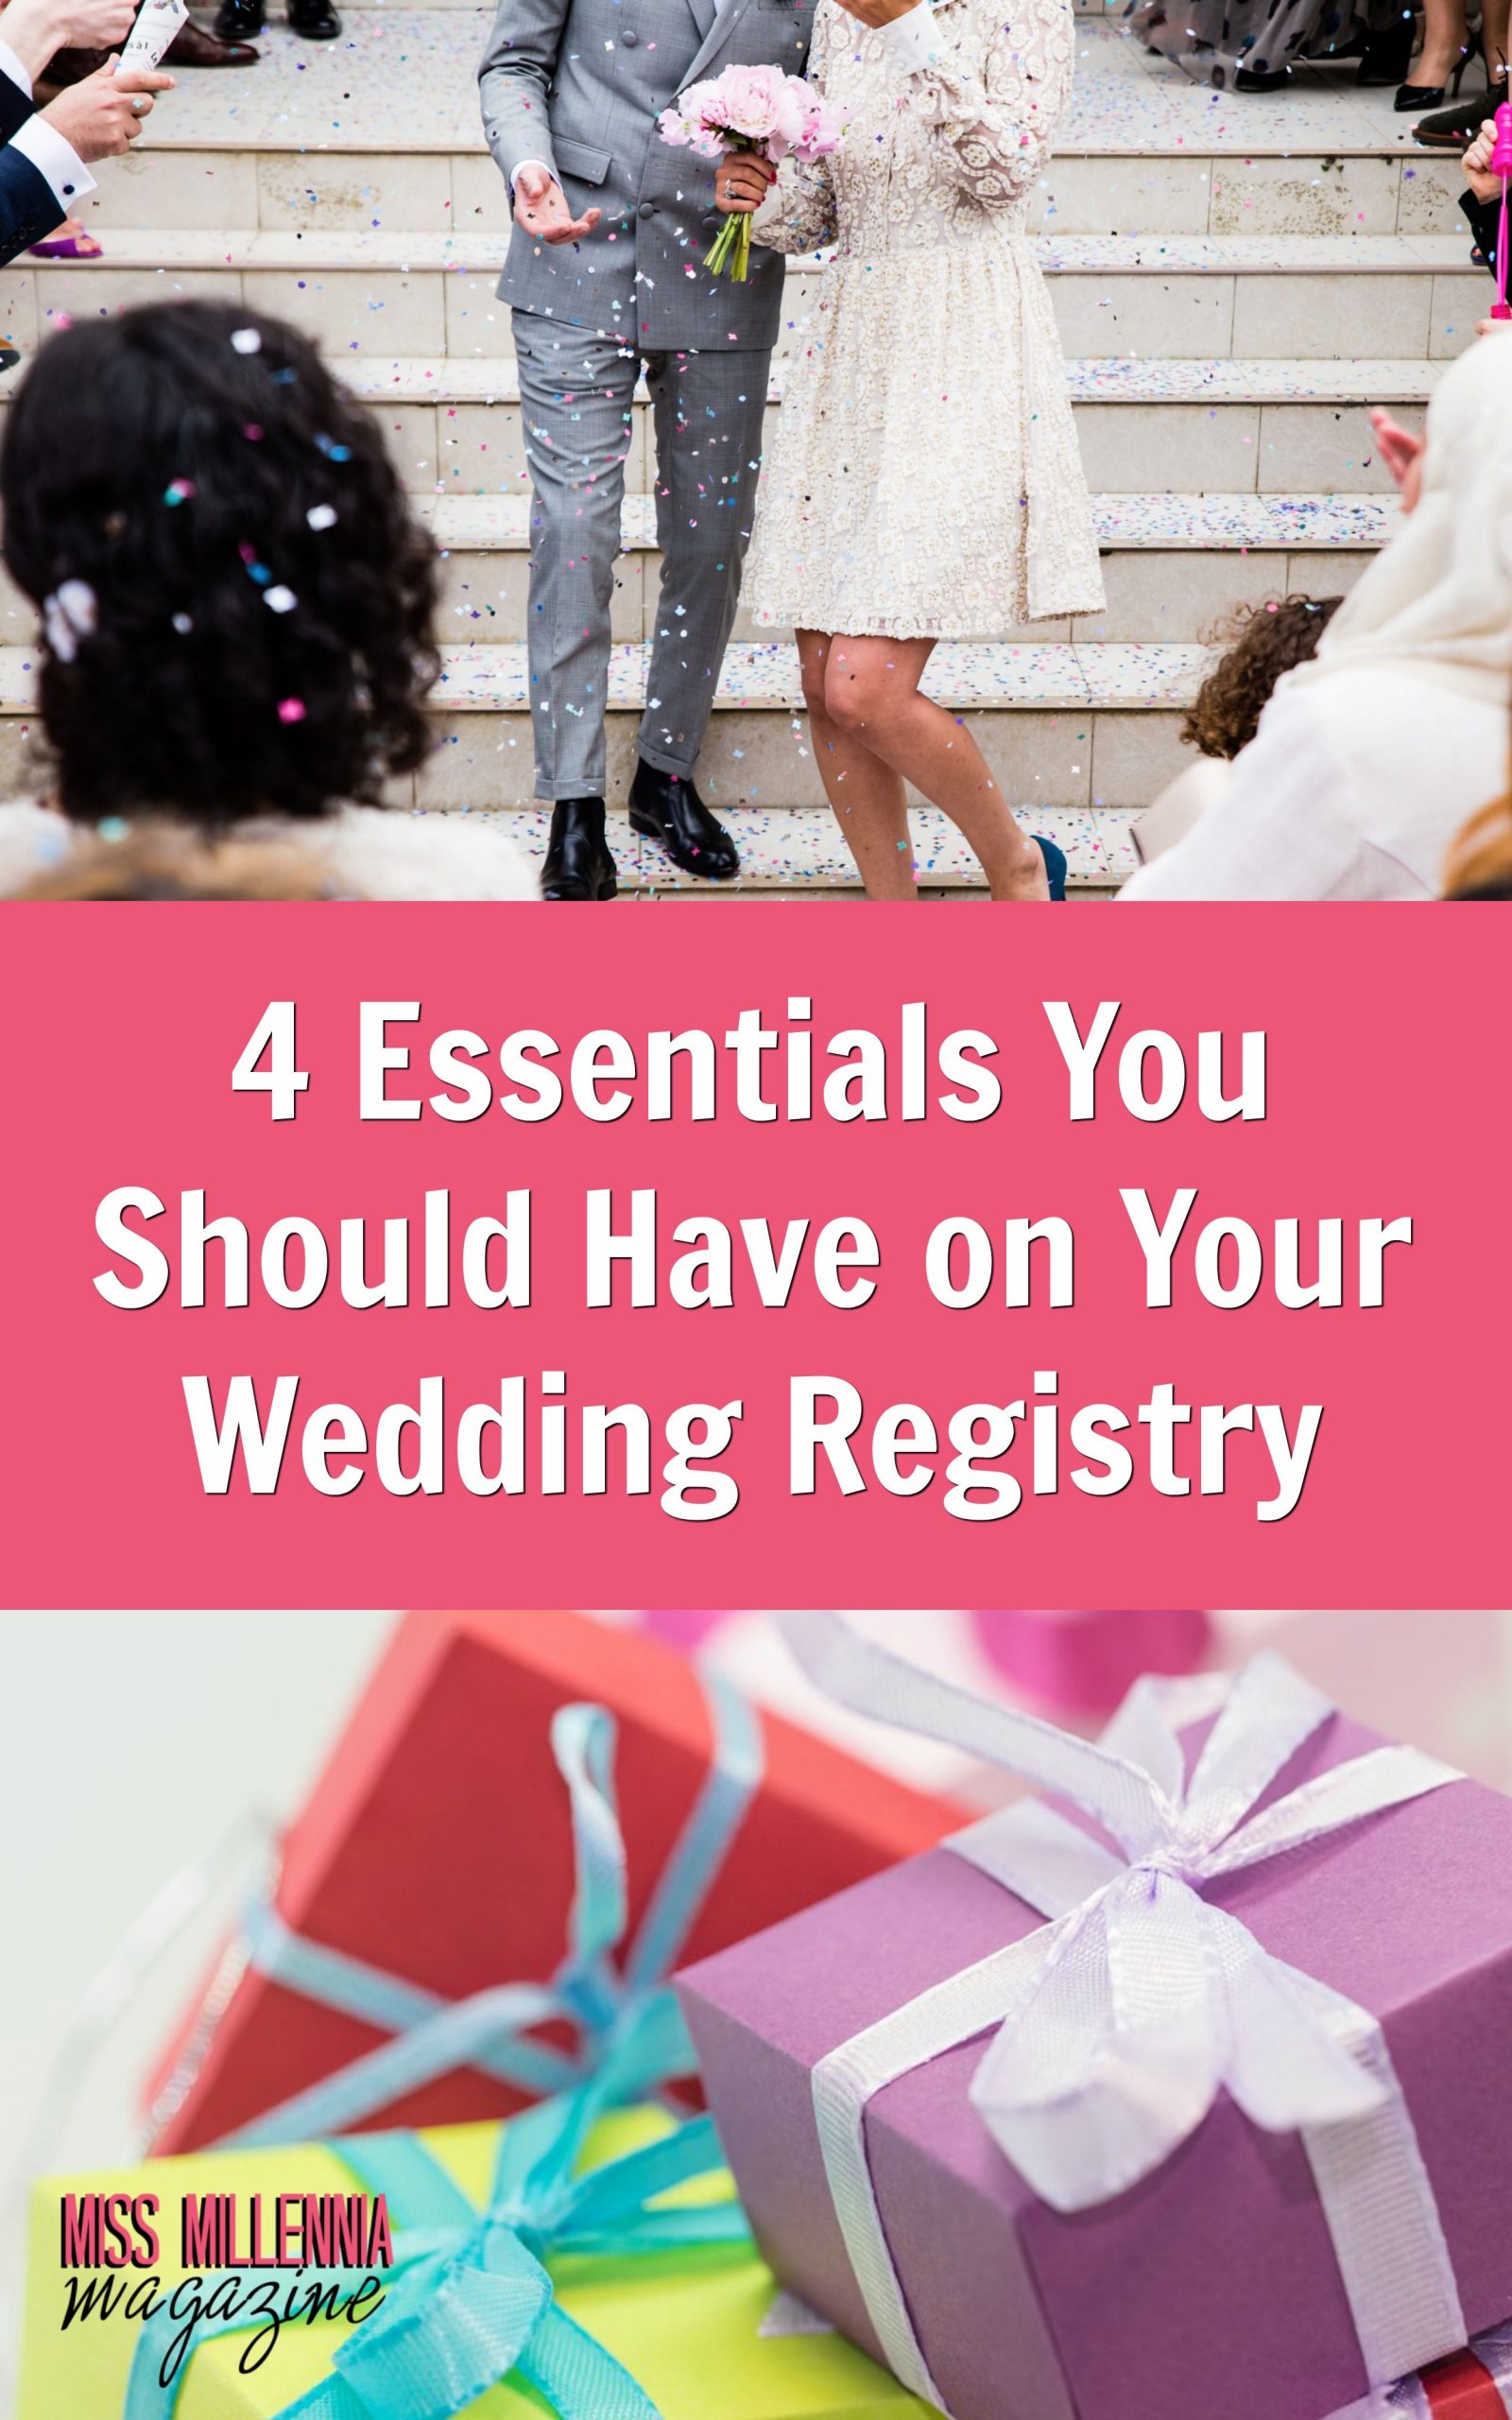 Here I want to share a few registry essentials you shouldn